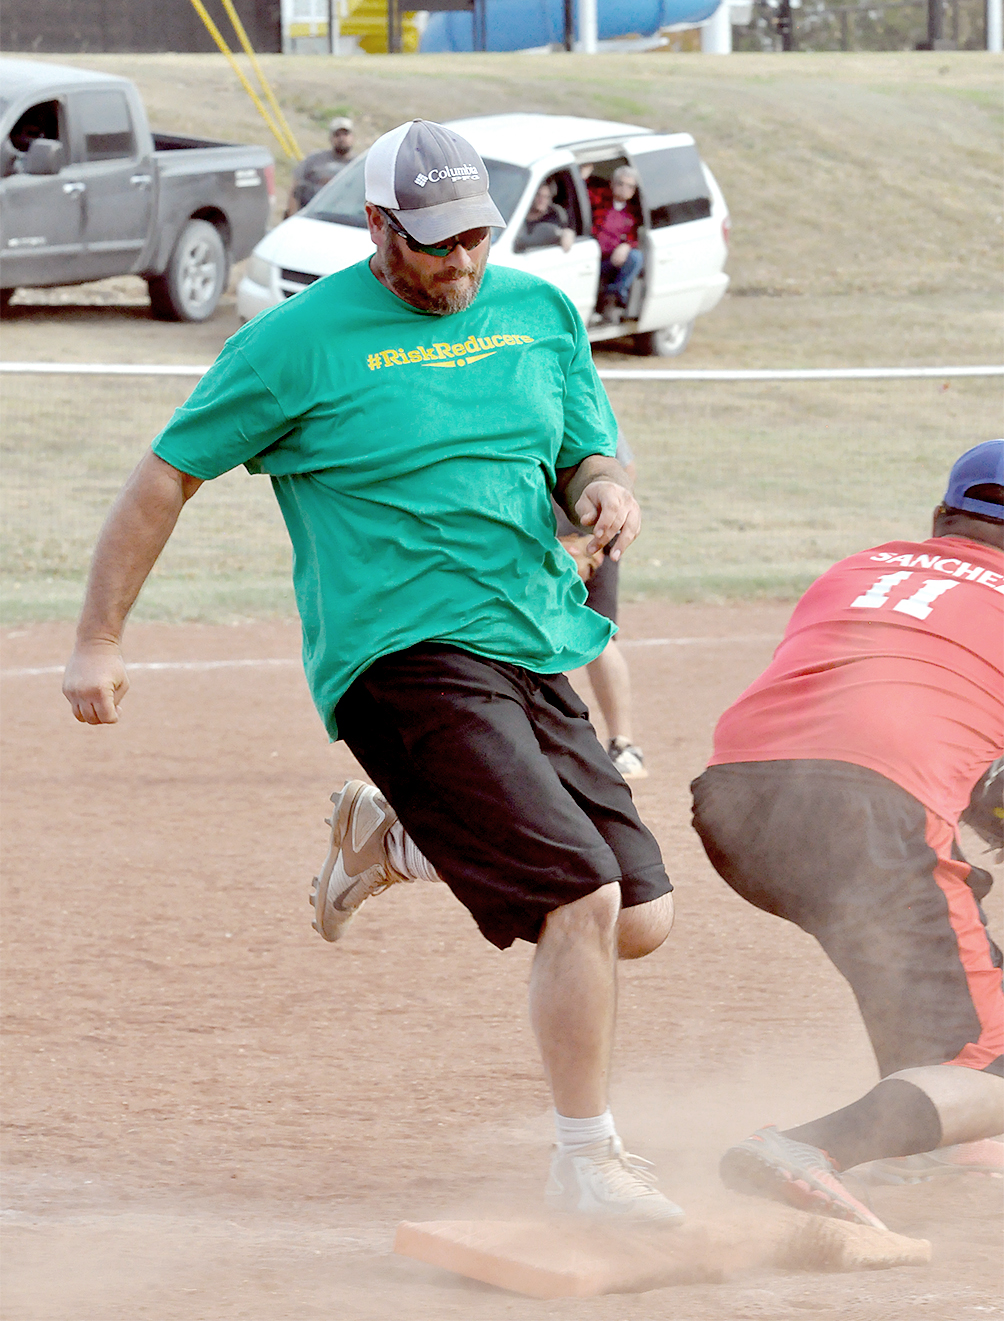 ZACH KESLER, beats out the throw to first base during the championship game of the Adult Softball Tournament held on Saturday. The #RiskReducers, sponsored by Heritage Insurance Group, Inc., defeated M.B.P. out of Great Bend to capture the trophy.